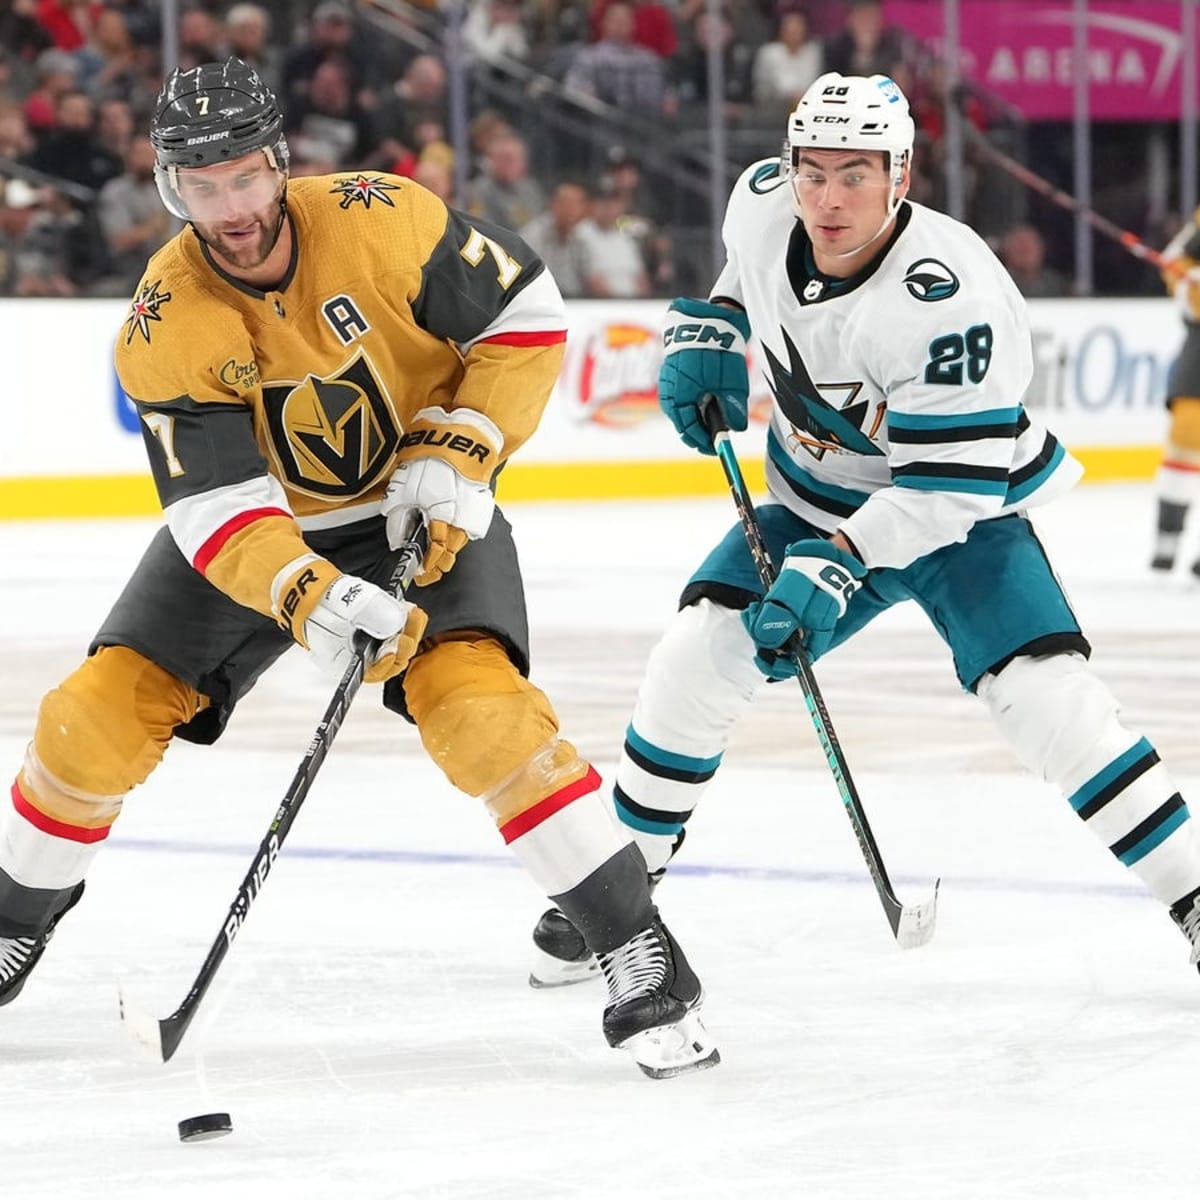 Coyotes at Golden Knights Free Live Stream NHL Online - How to Watch and Stream Major League and College Sports